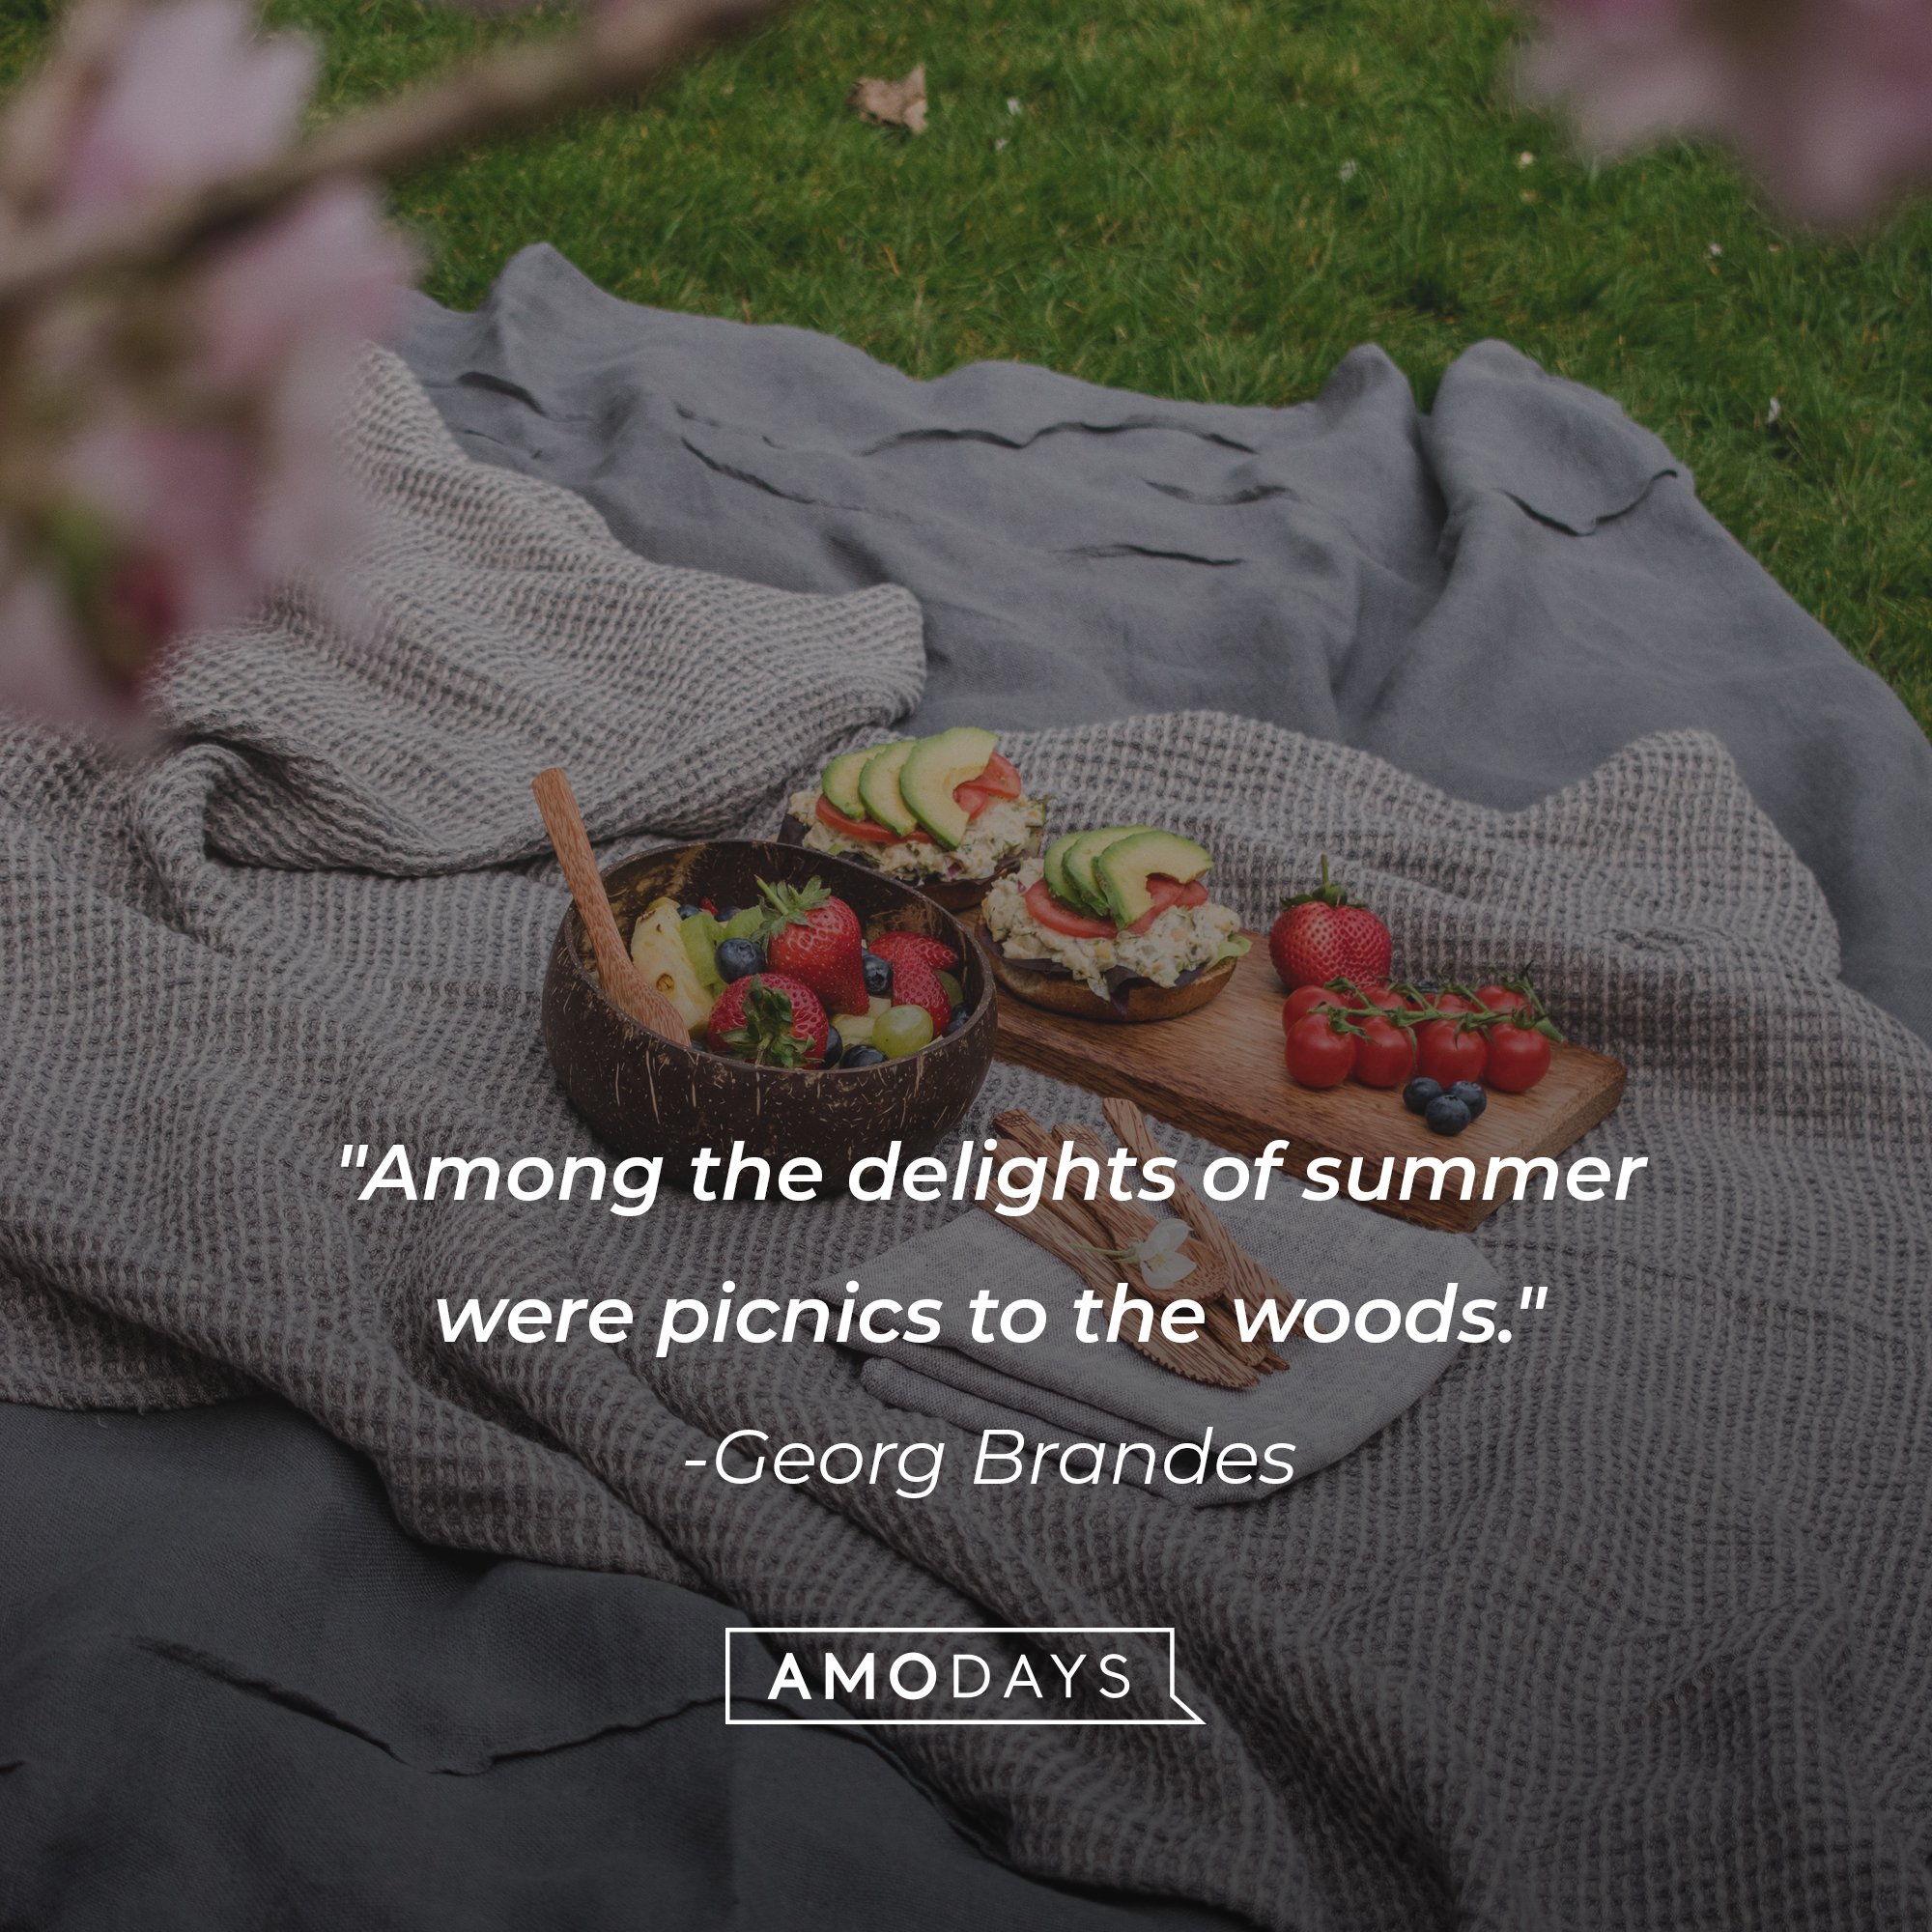 Georg Brandes' quote: "Among the delights of summer were picnics to the woods." | Image: AmoDays